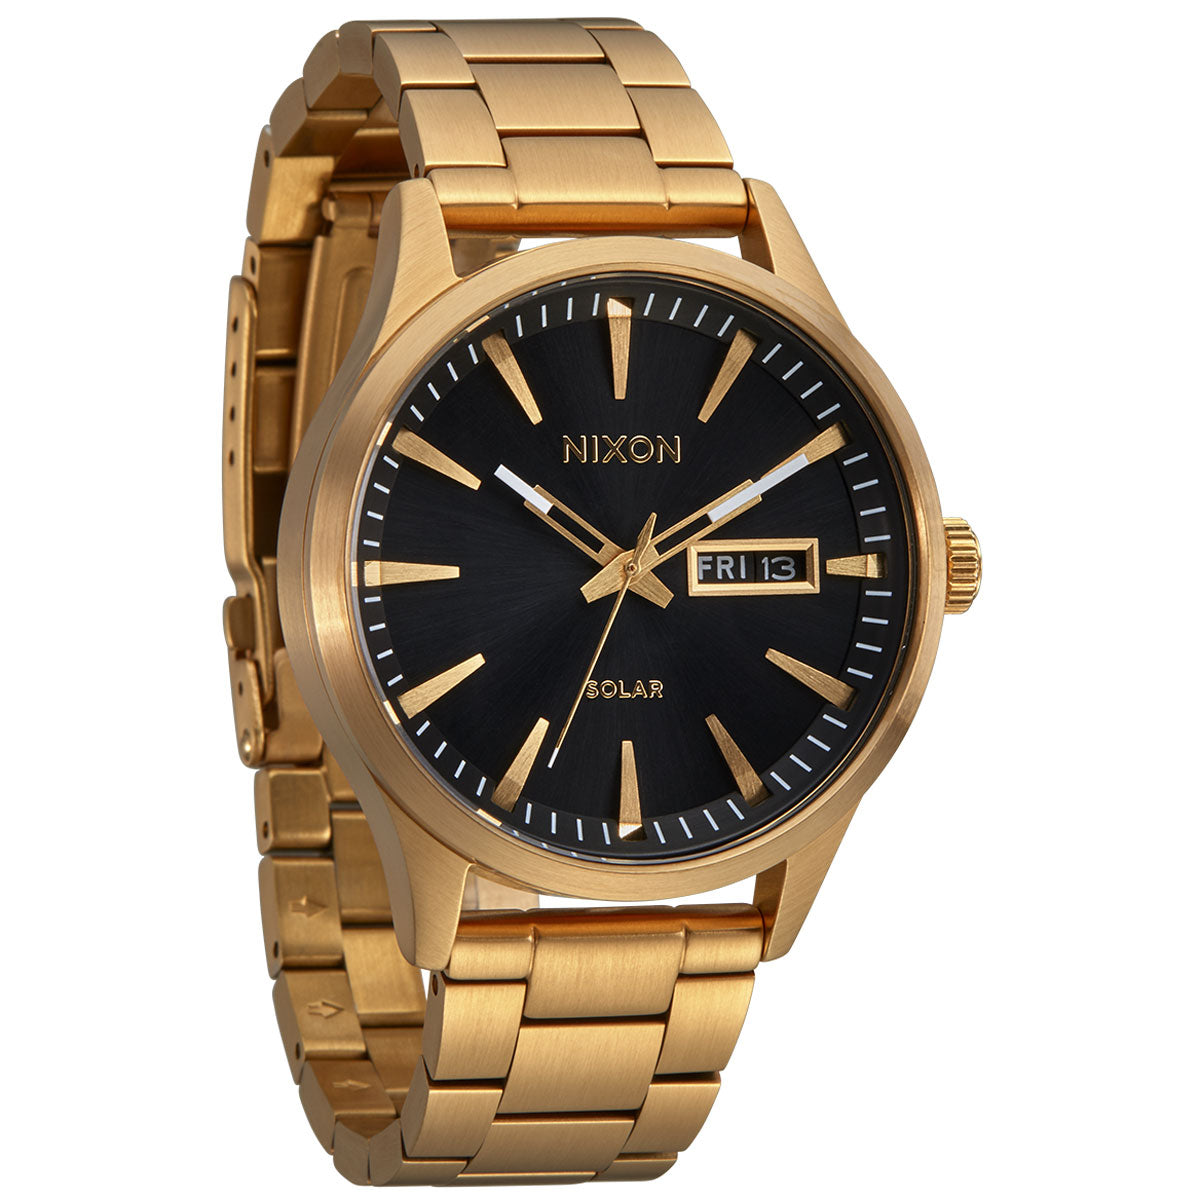 Nixon Sentry Solar Stainless Steel Watch - All Gold/Black image 4